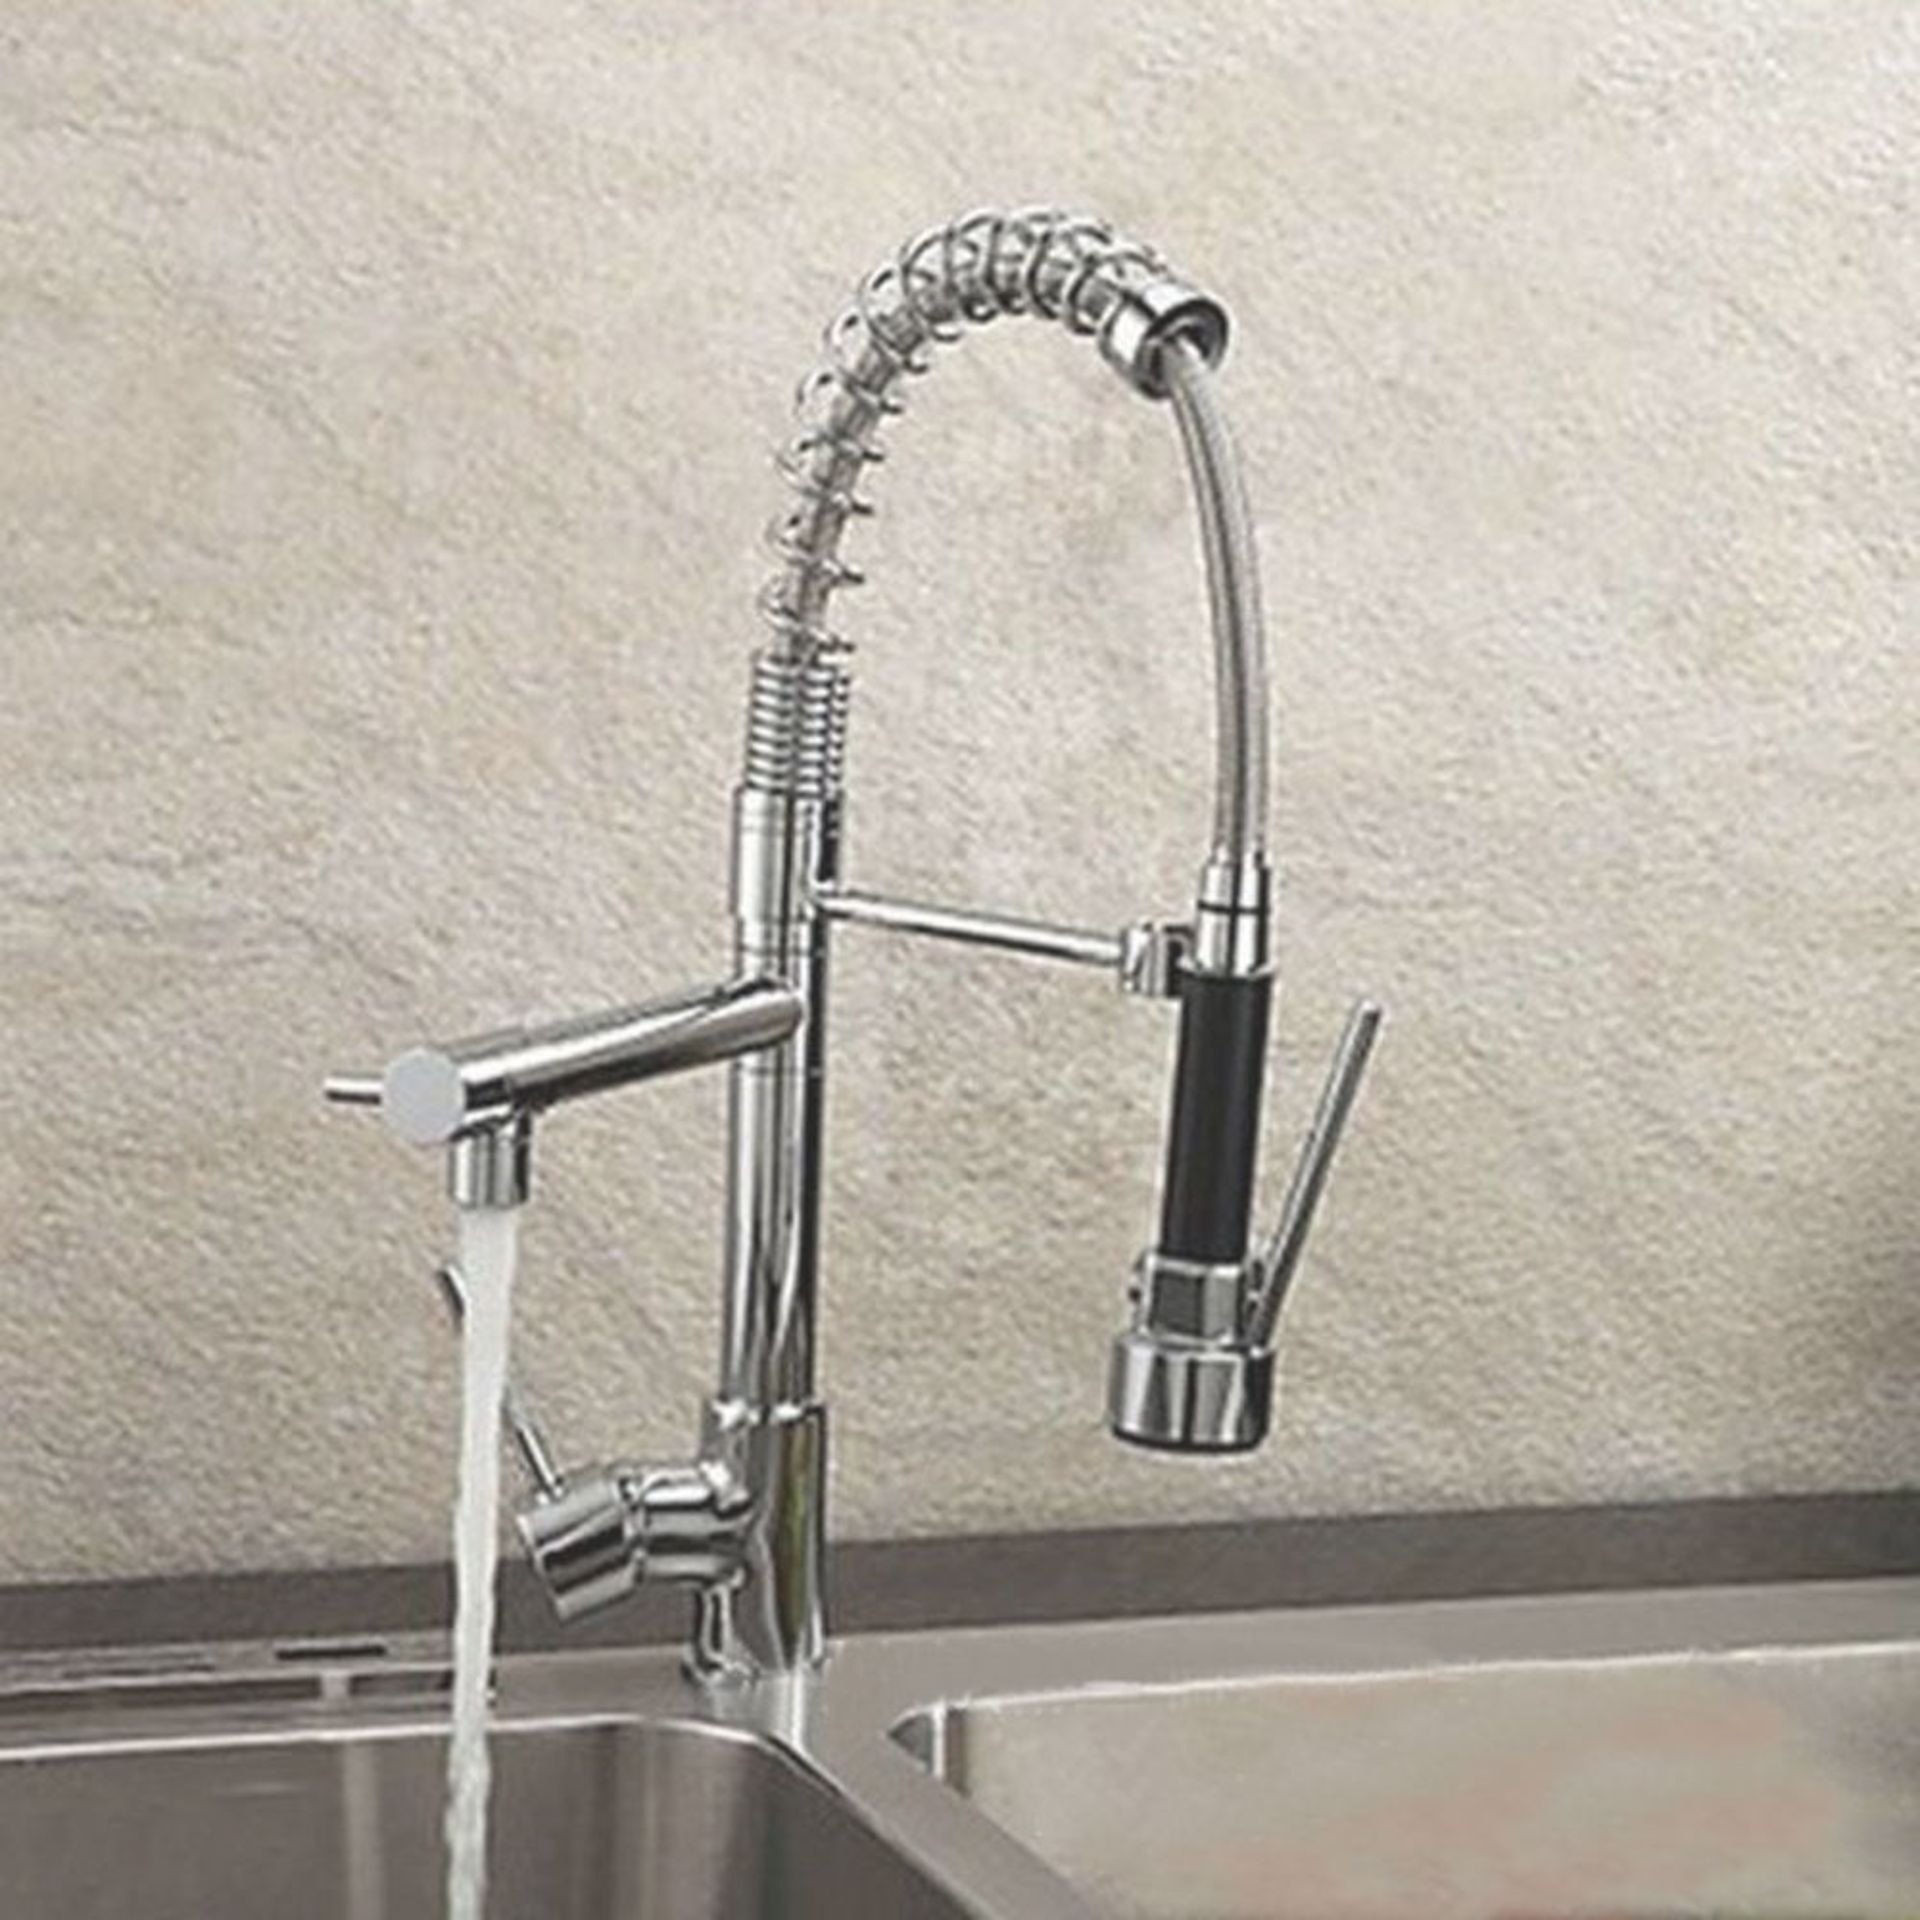 Brand New Bentley Modern Monobloc Chrome Brass Pull Out Spray Mixer Tap.RRP £349.99.This tap is from